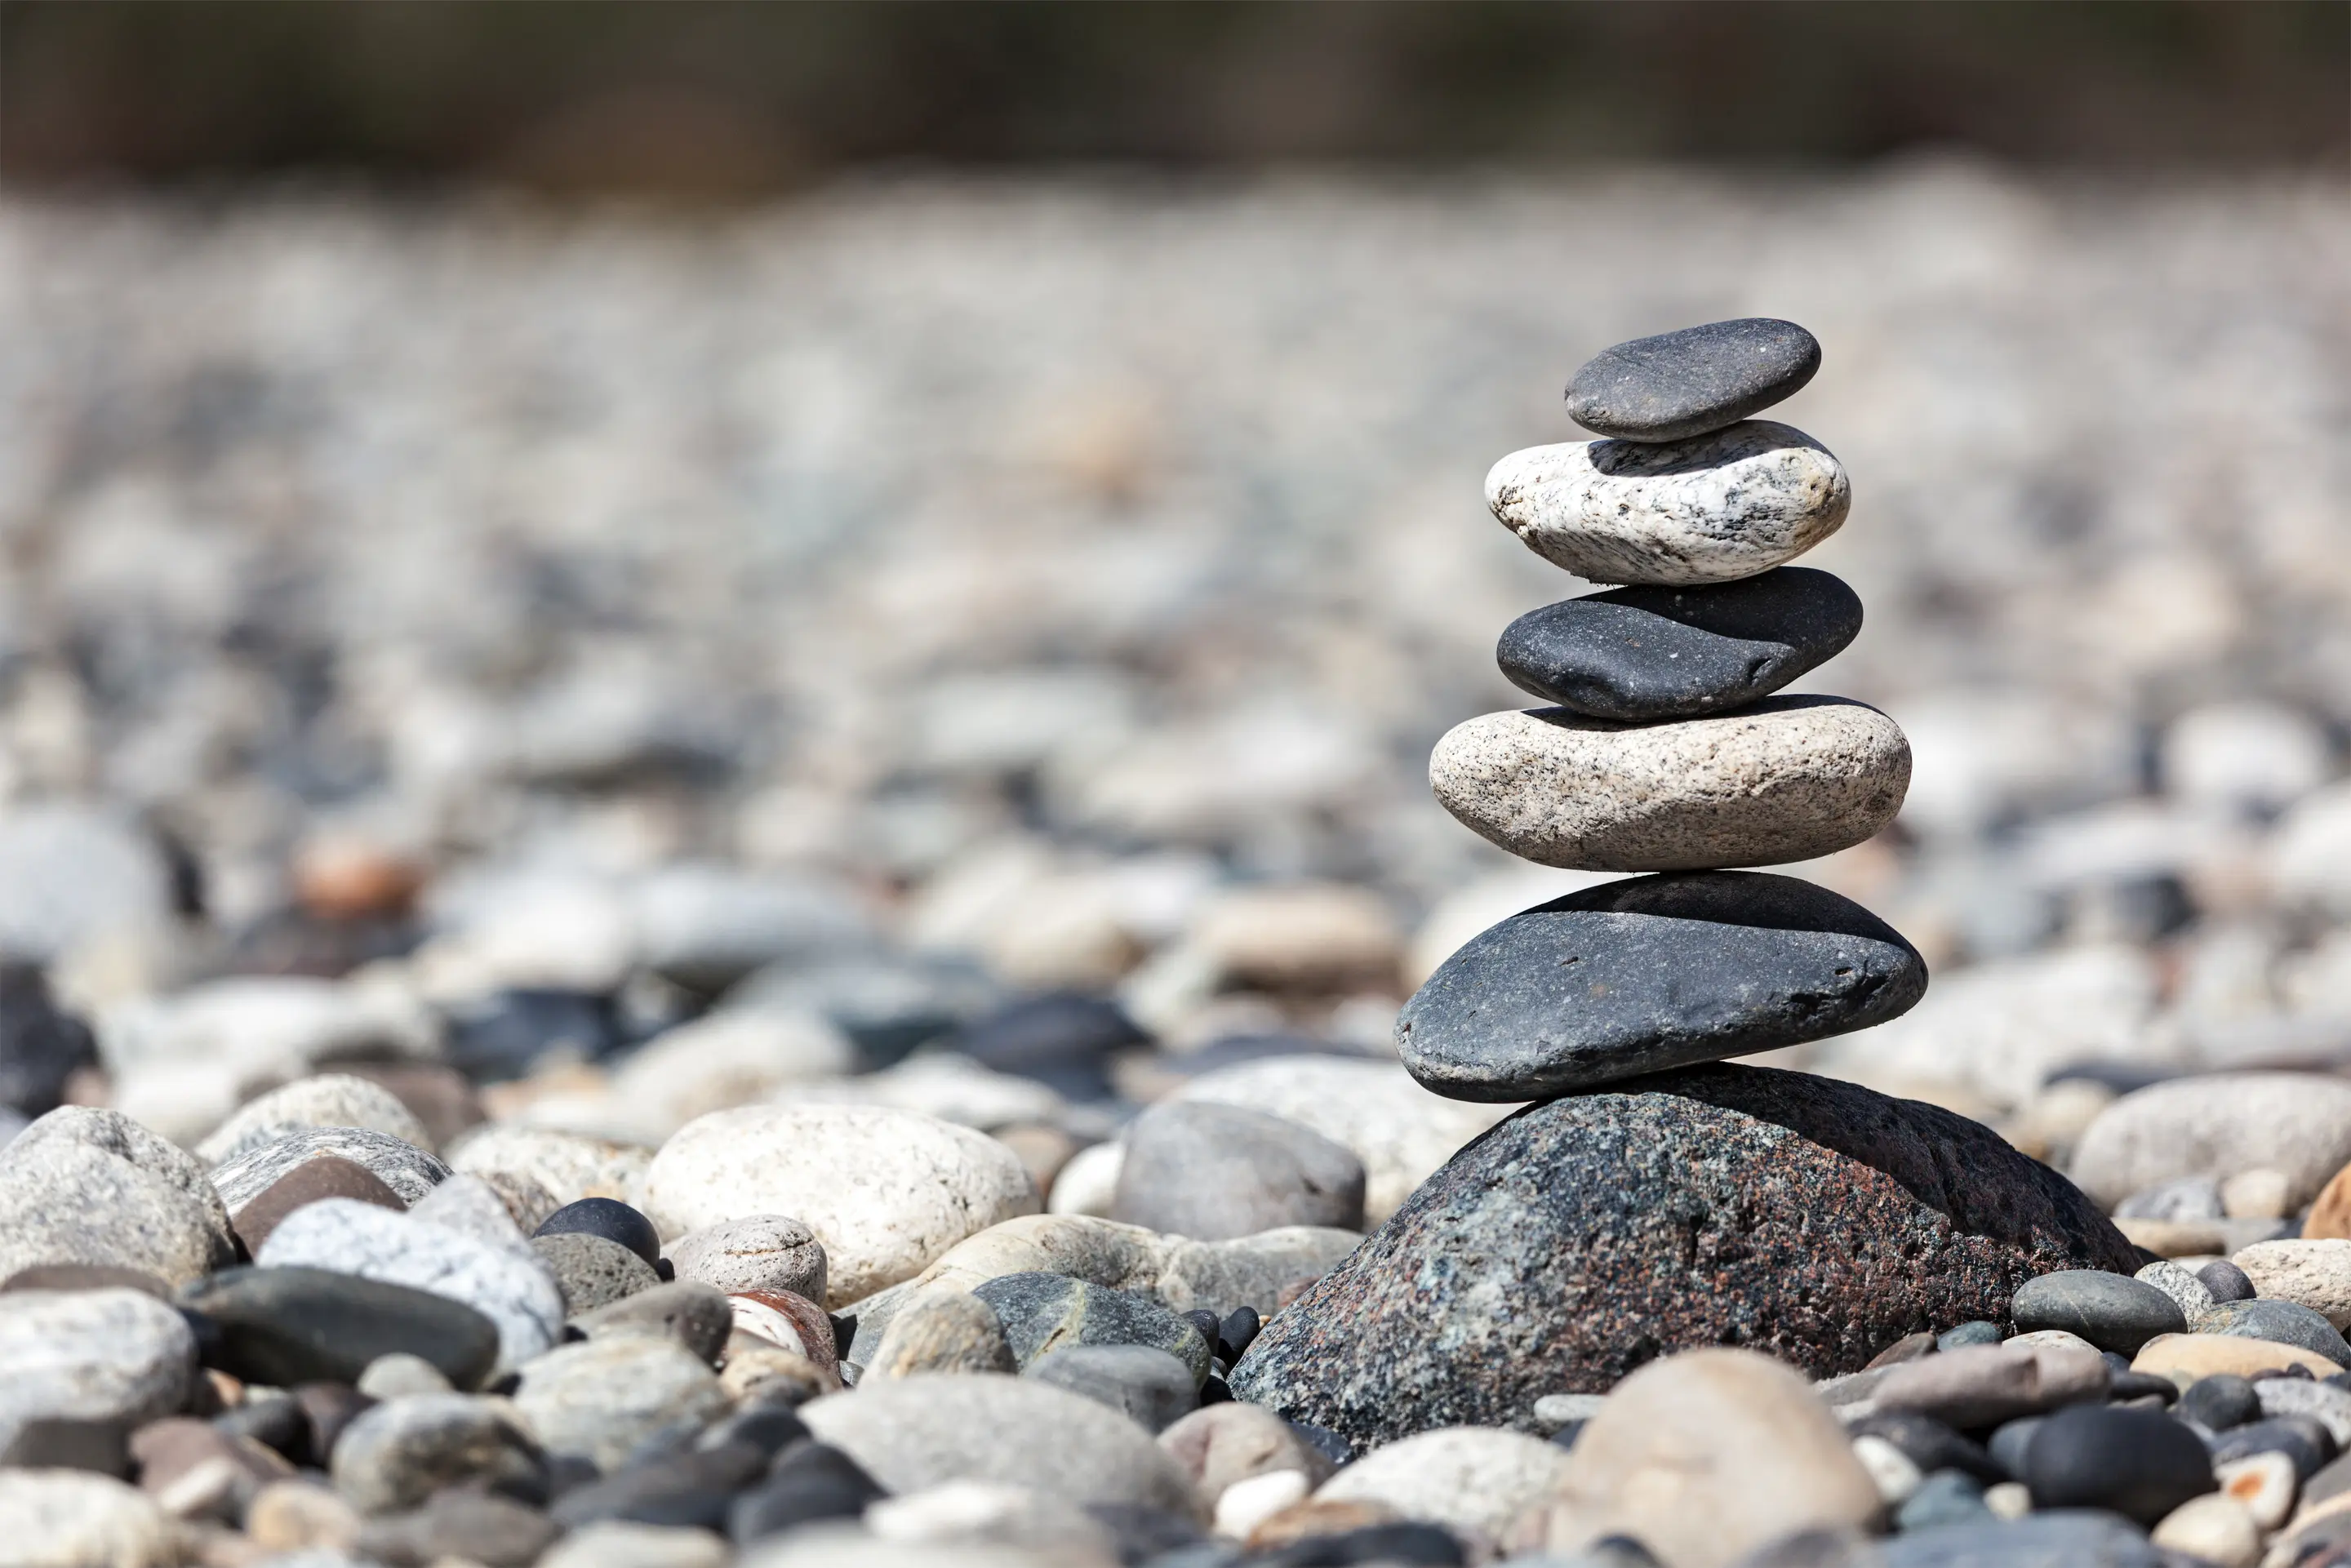 A stack of small stones balanced one on top of the other, with a stony beach in the background.